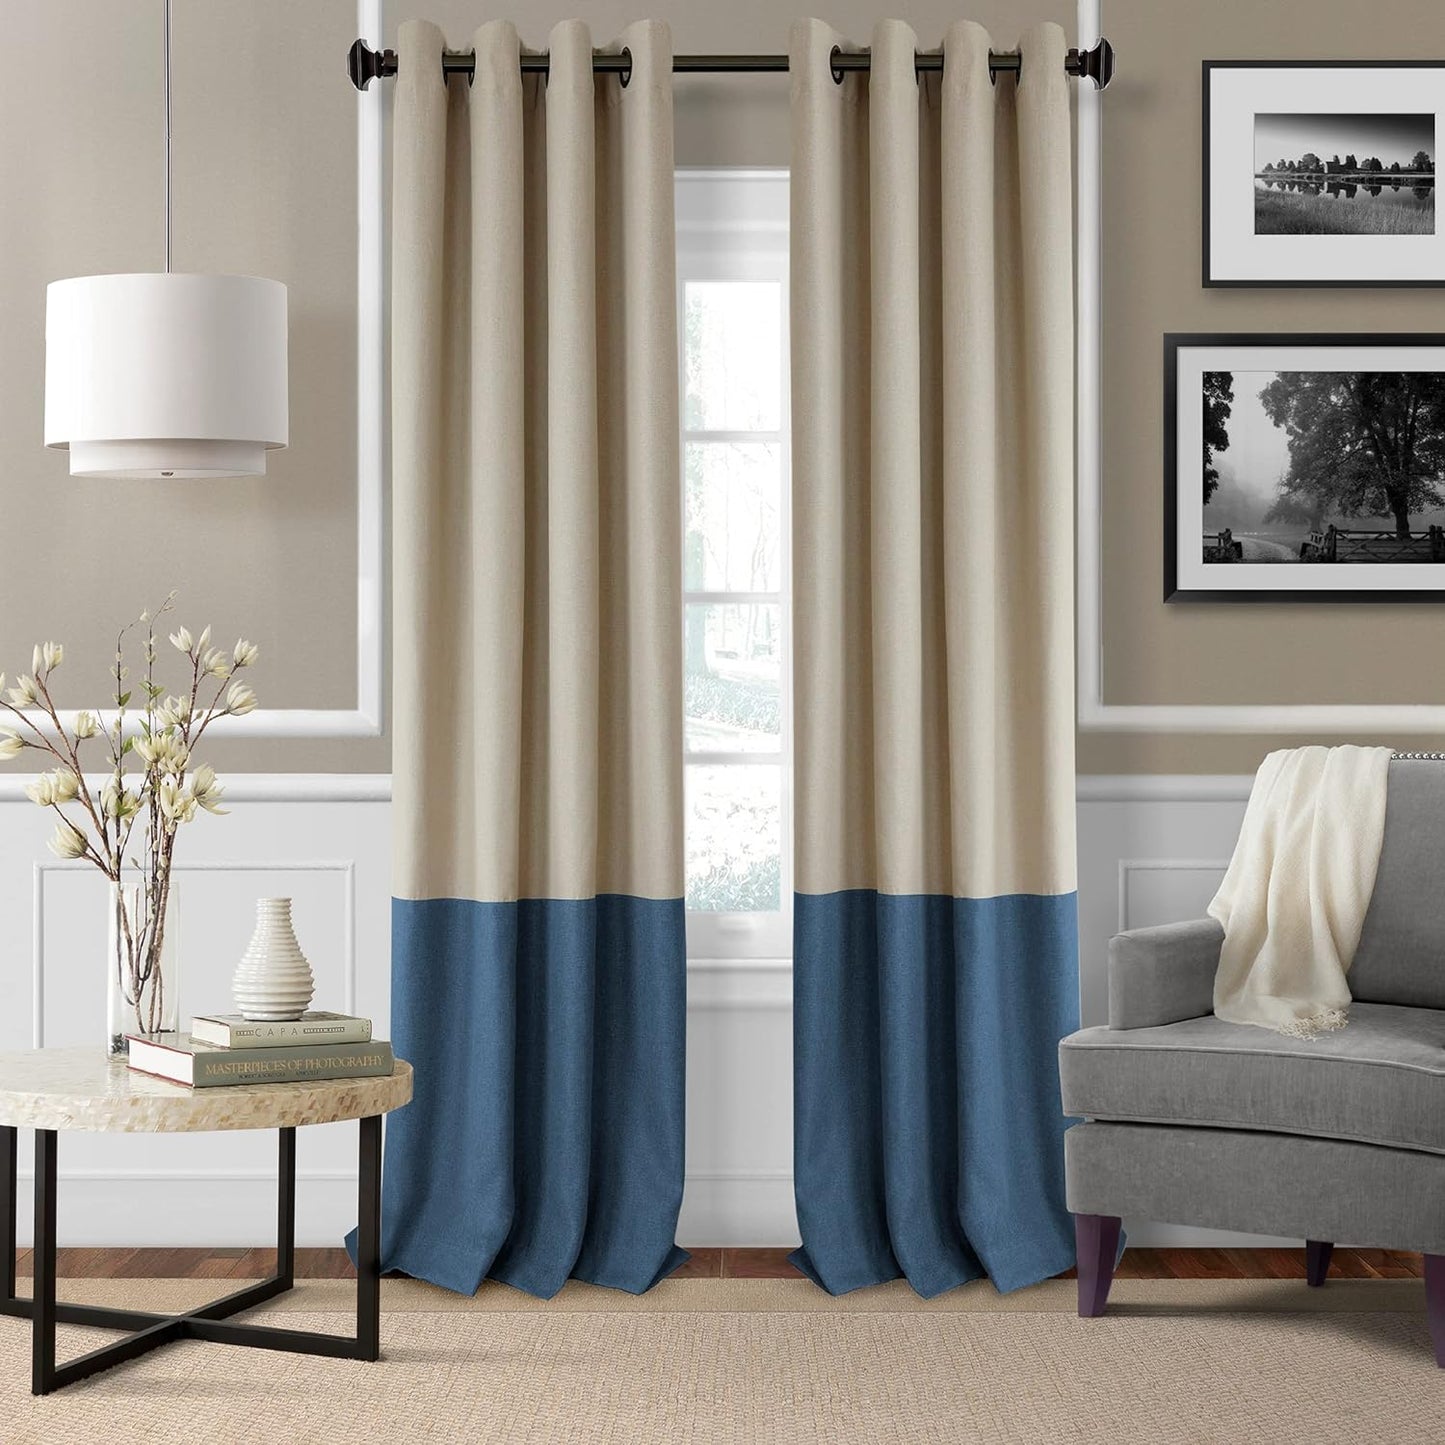 Elrene Home Fashions Braiden Color-Block Blackout Window Curtain, Single Panel, 52 in X 84 in (1 Panel), Linen  Elrene Home Fashions Navy 52" X 95" (1 Panel) 